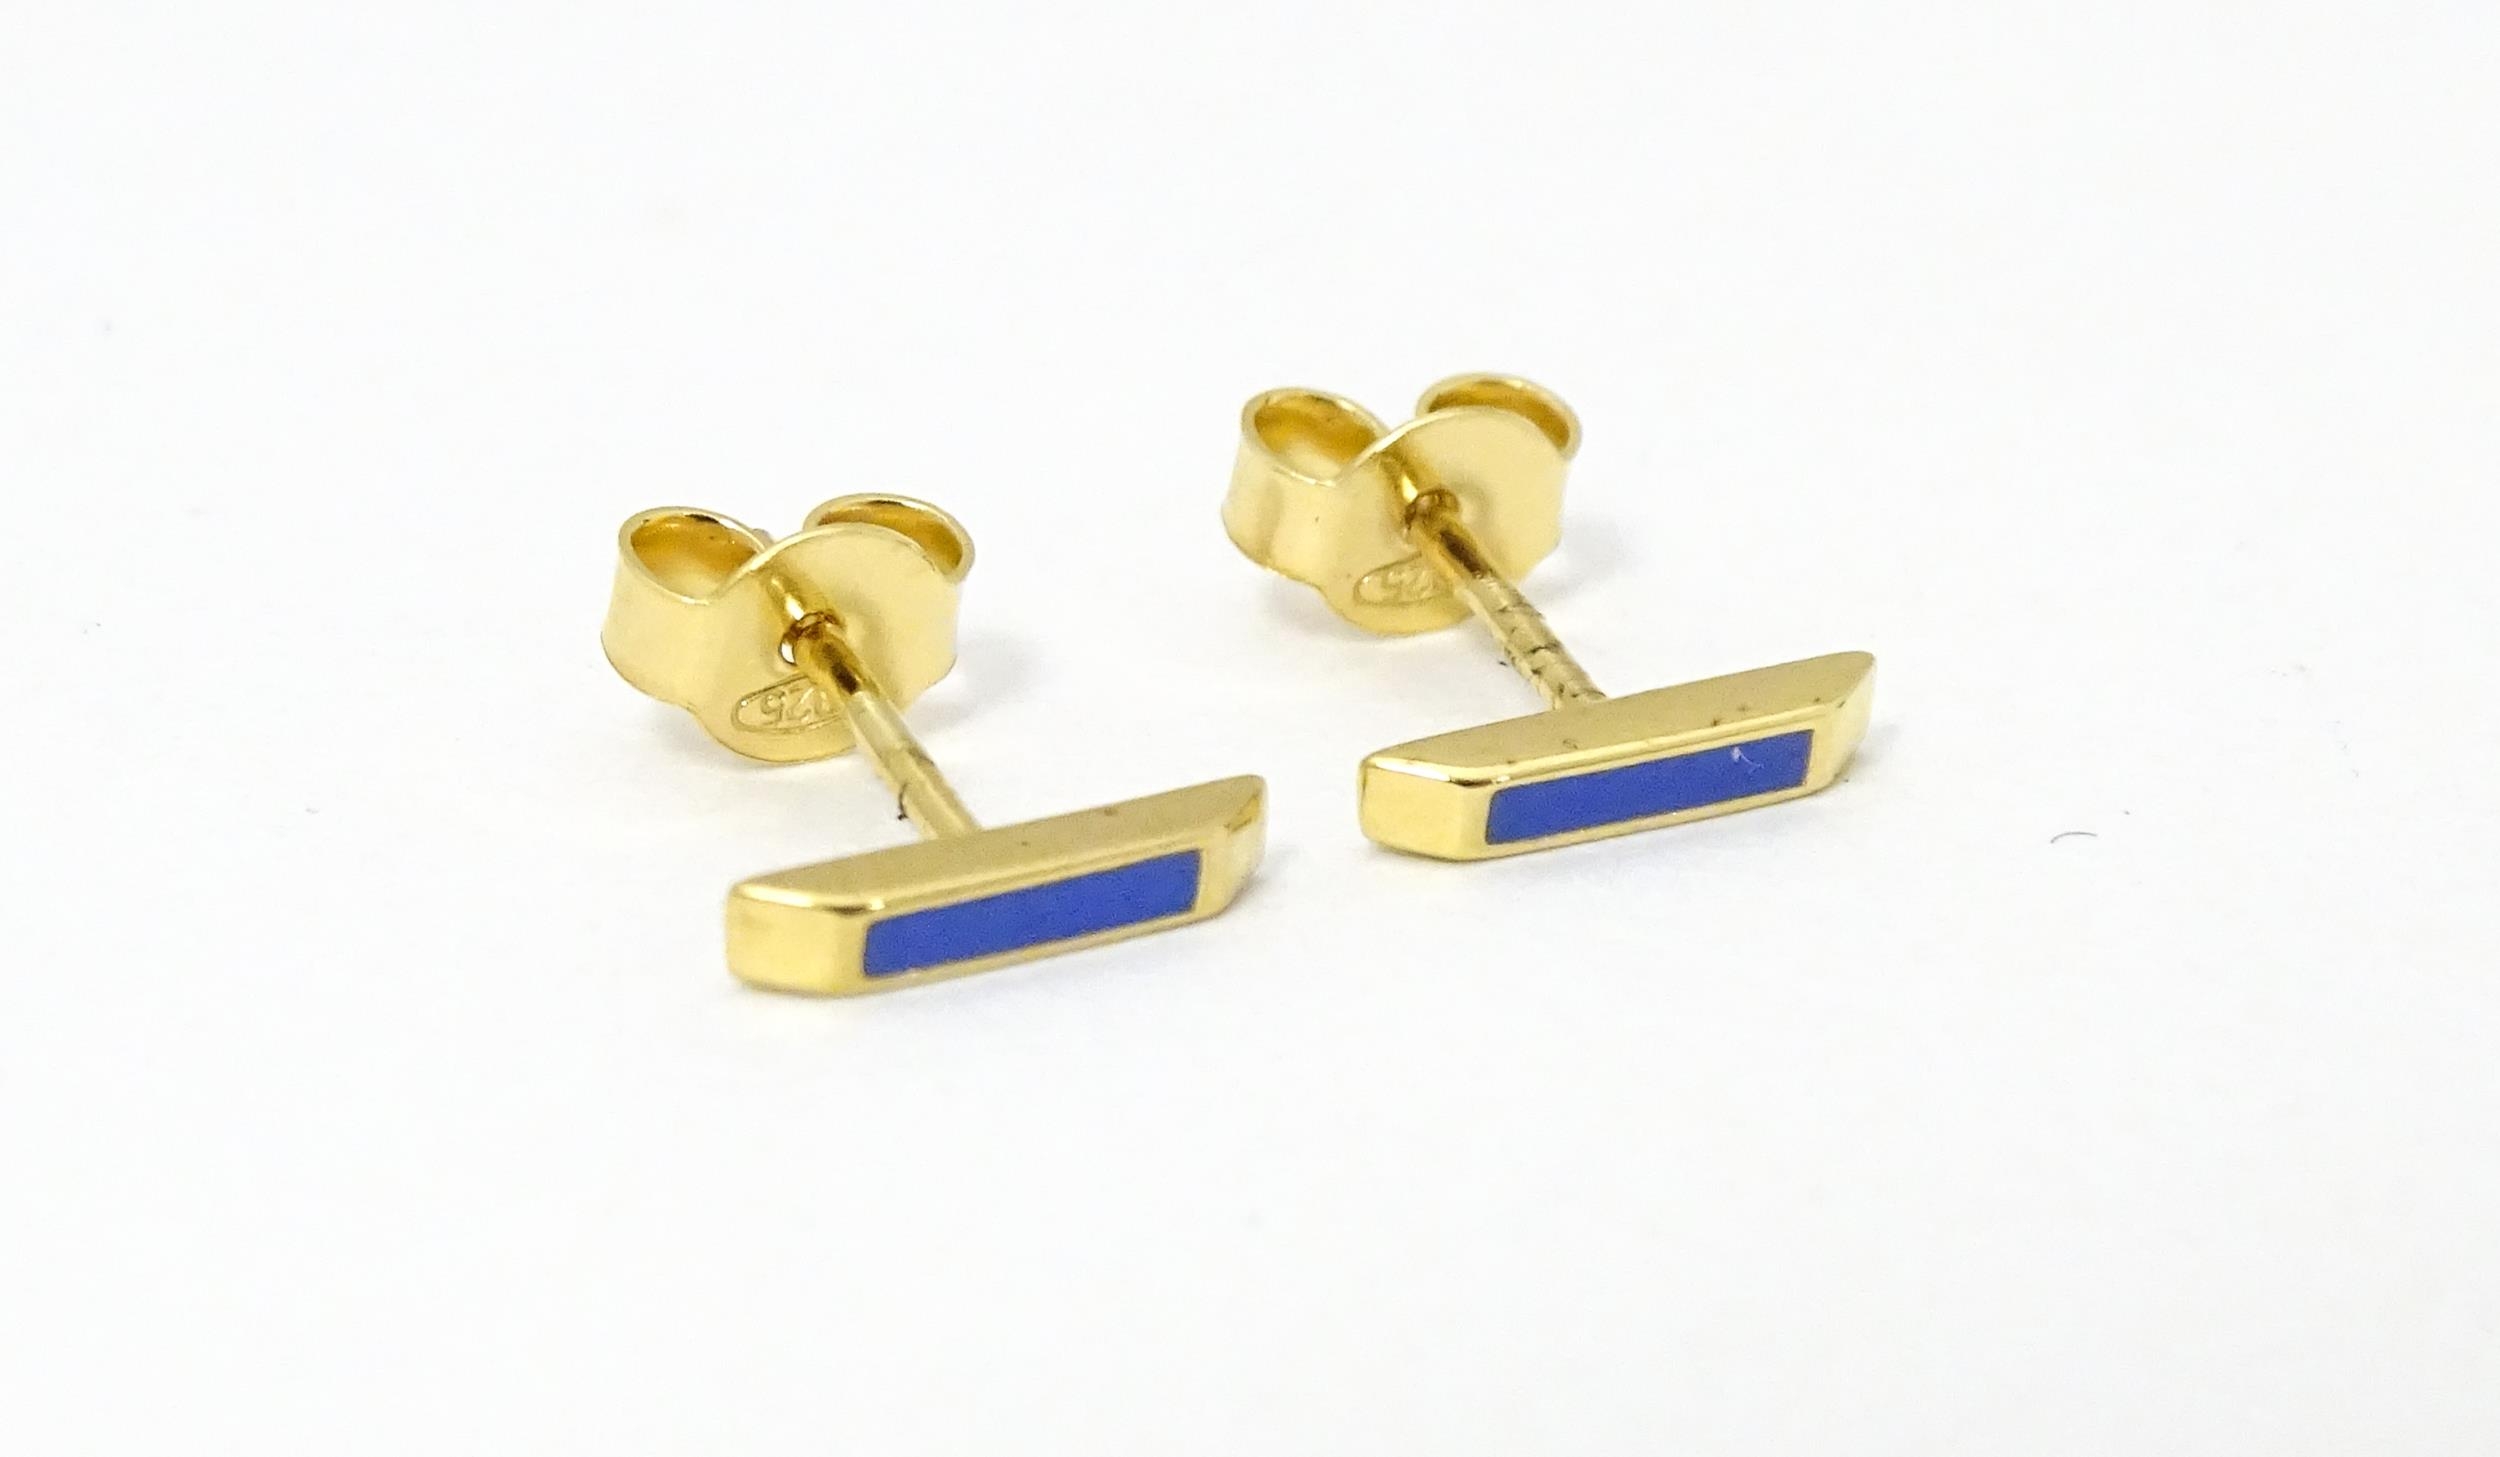 A pair of Astley Clarke 925 silver gilt stud earrings with blue enamel detail. Approx. 1/4" wide - Image 5 of 8